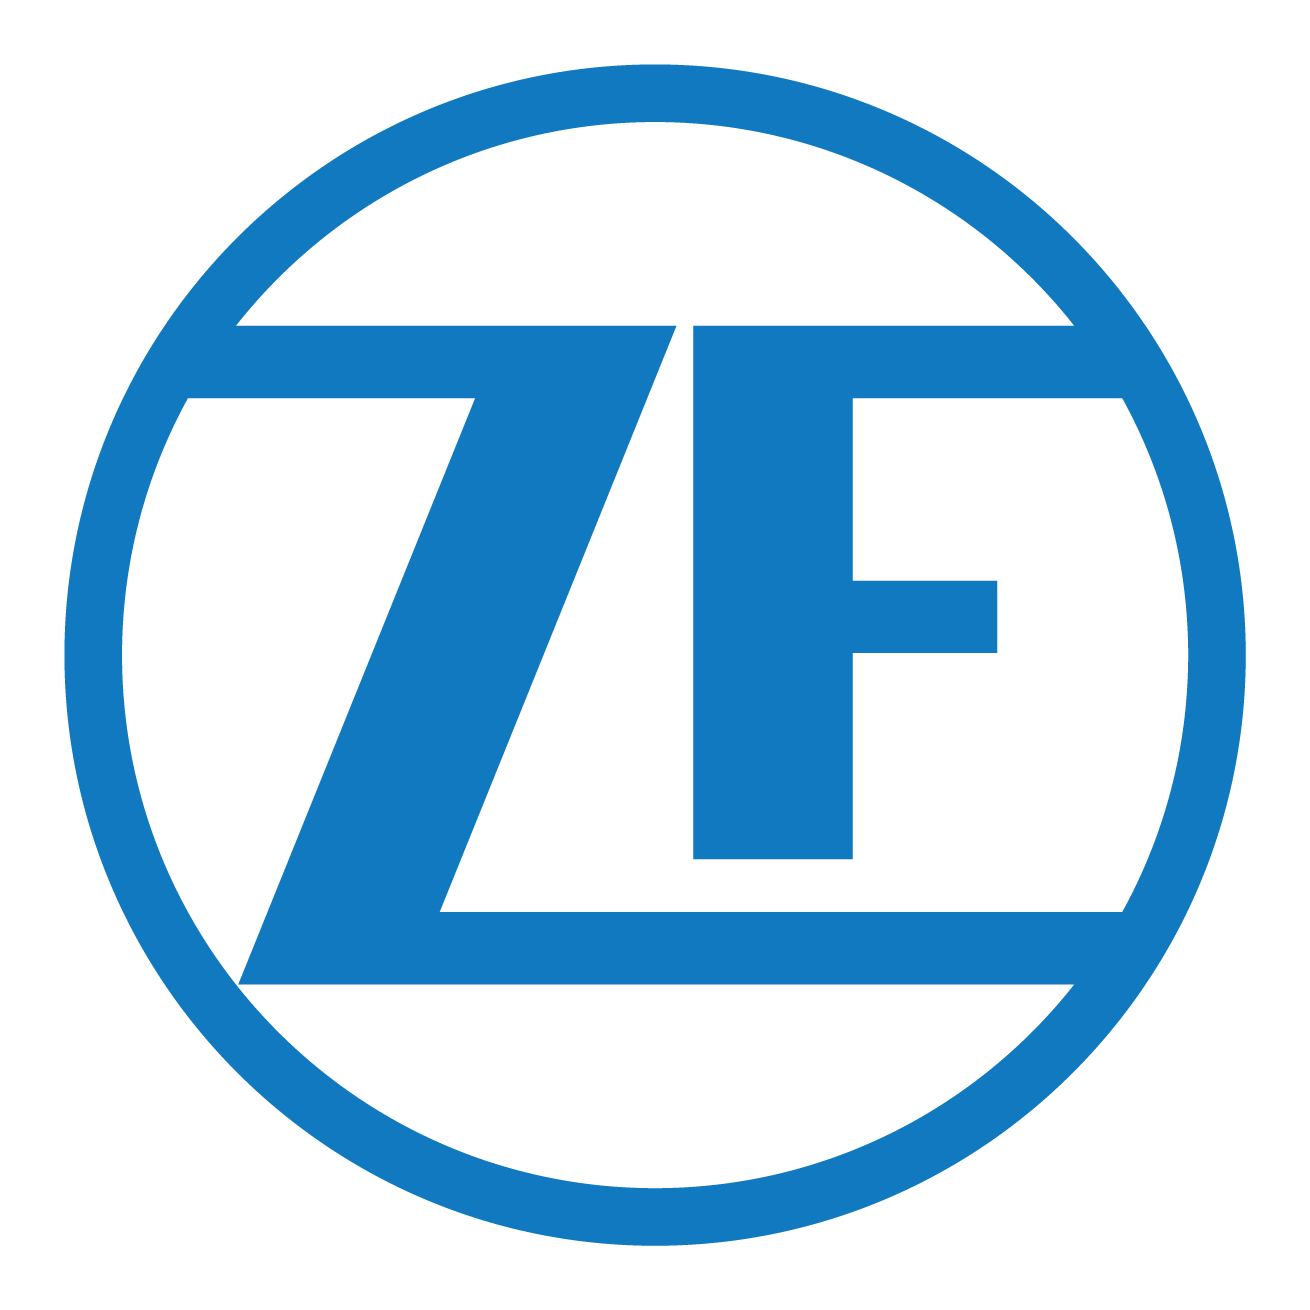 Smaller, lighter, more powerful: ZF presents new e-drives for passenger  cars and commercial vehicles - ZF